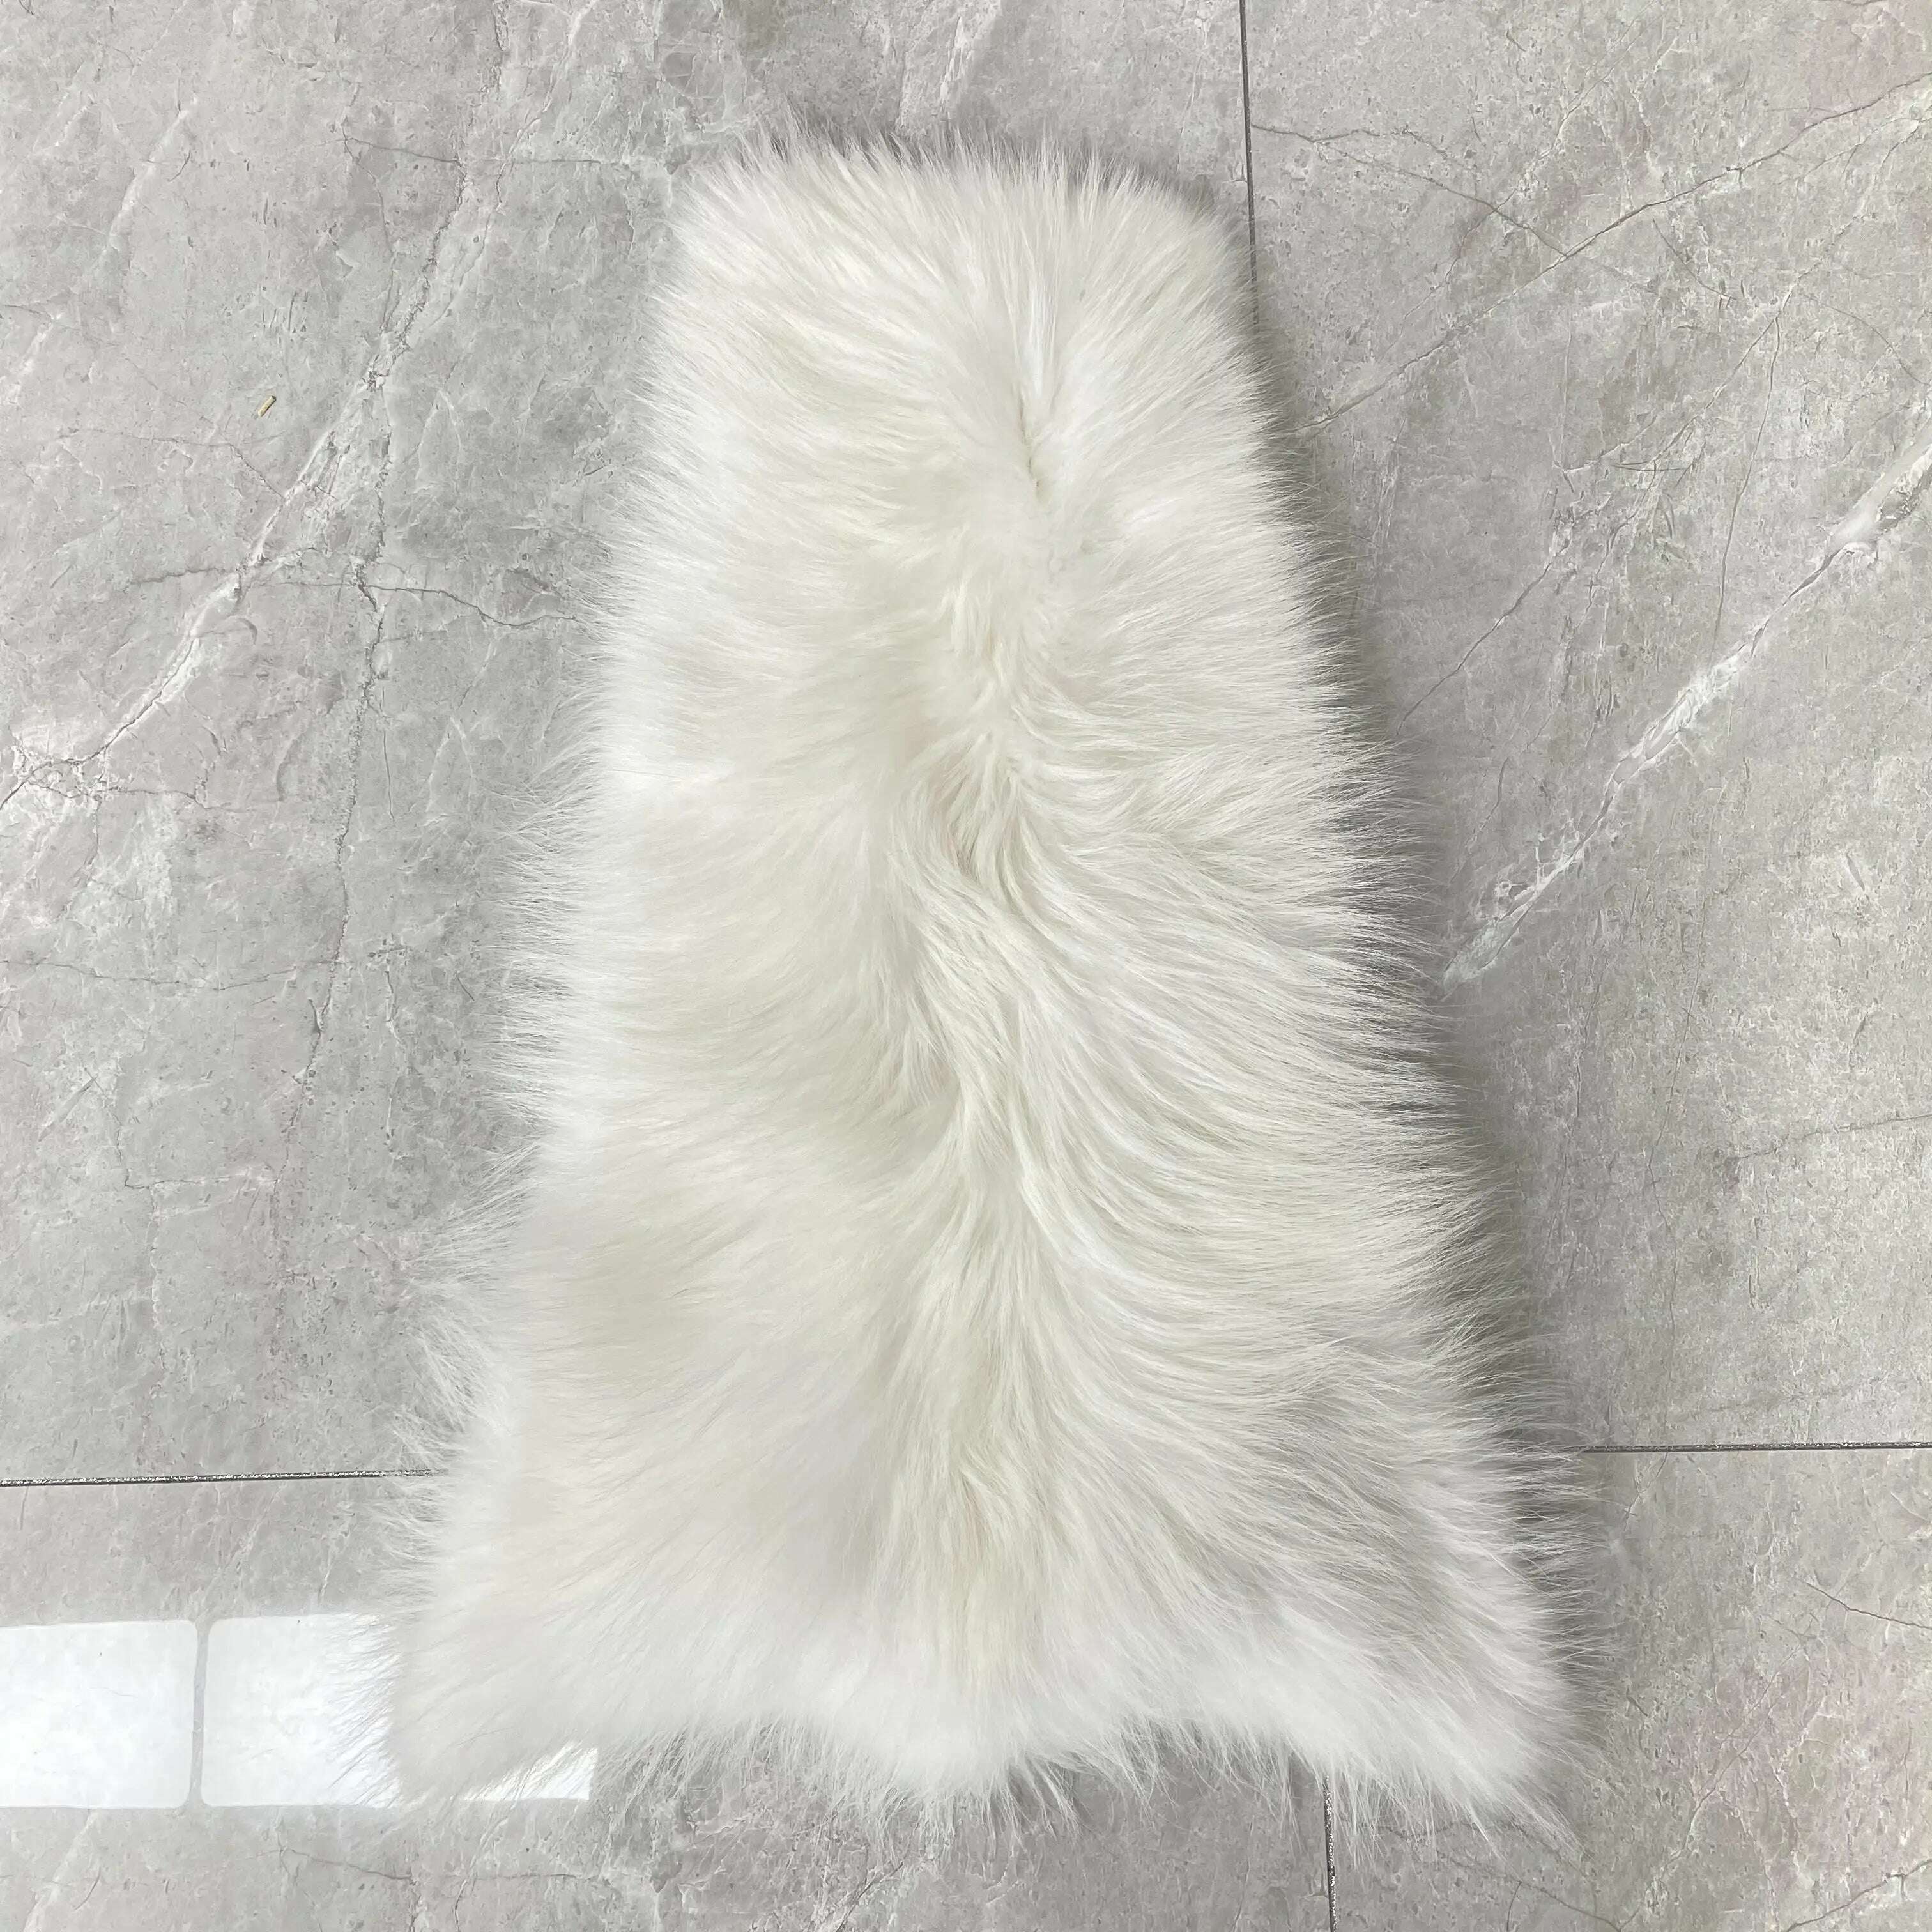 KIMLUD, Men Clothes Golden Island White Special Fox Fur Coat Full Pelt Customized Size Available, White / XS(88cm), KIMLUD Women's Clothes